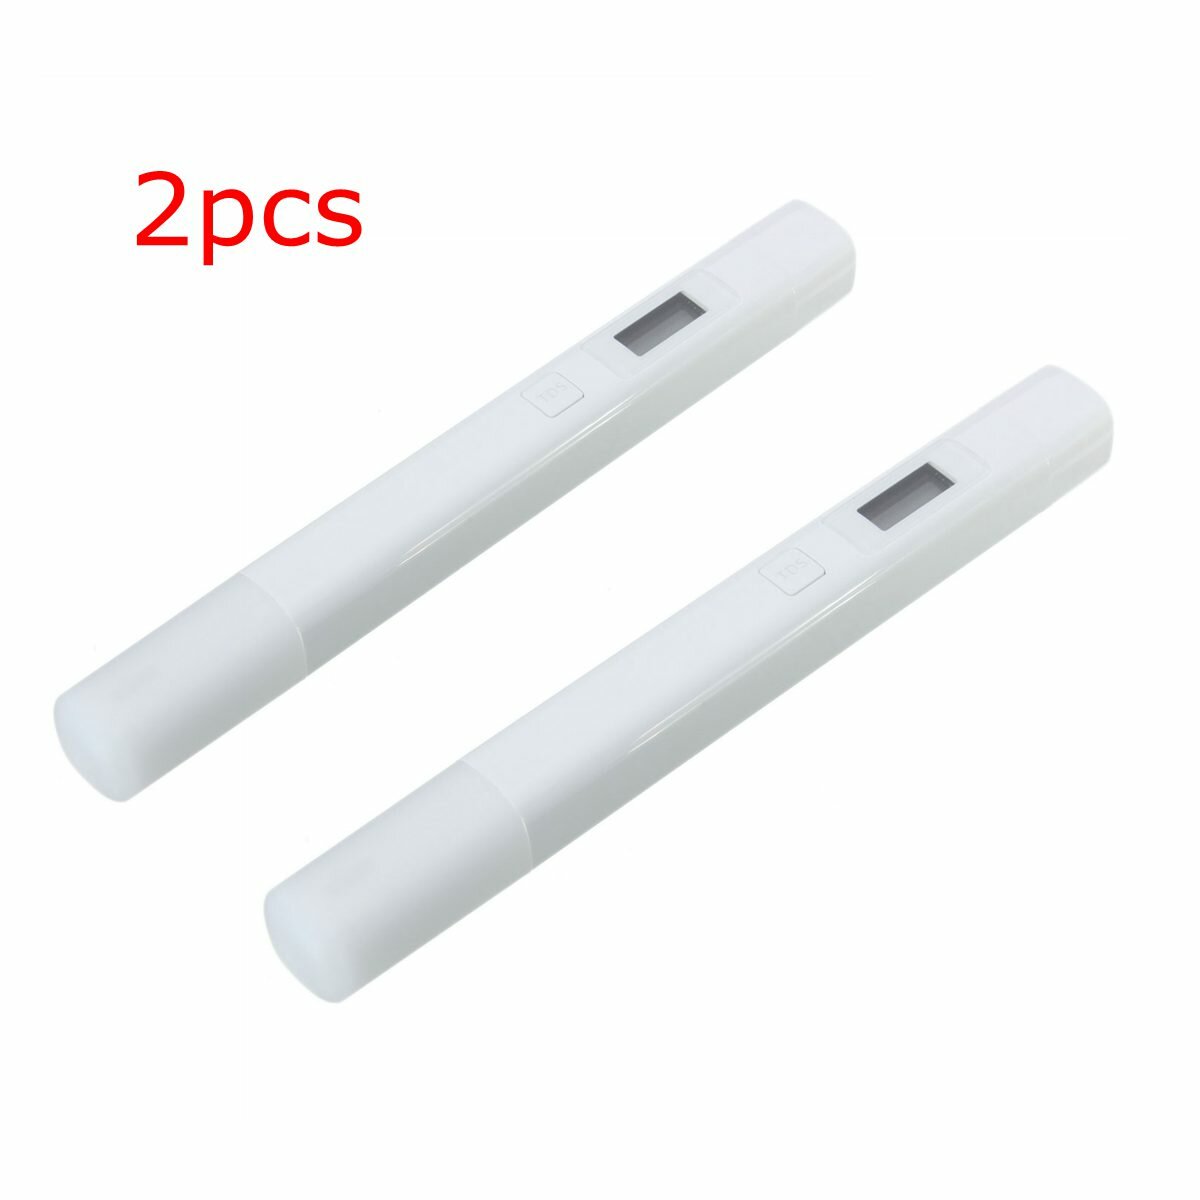 

2PCS Xiaomi Mi TDS Test Pen Portable Water Purity Professional Measuring Quality Tester TDS-3 Home